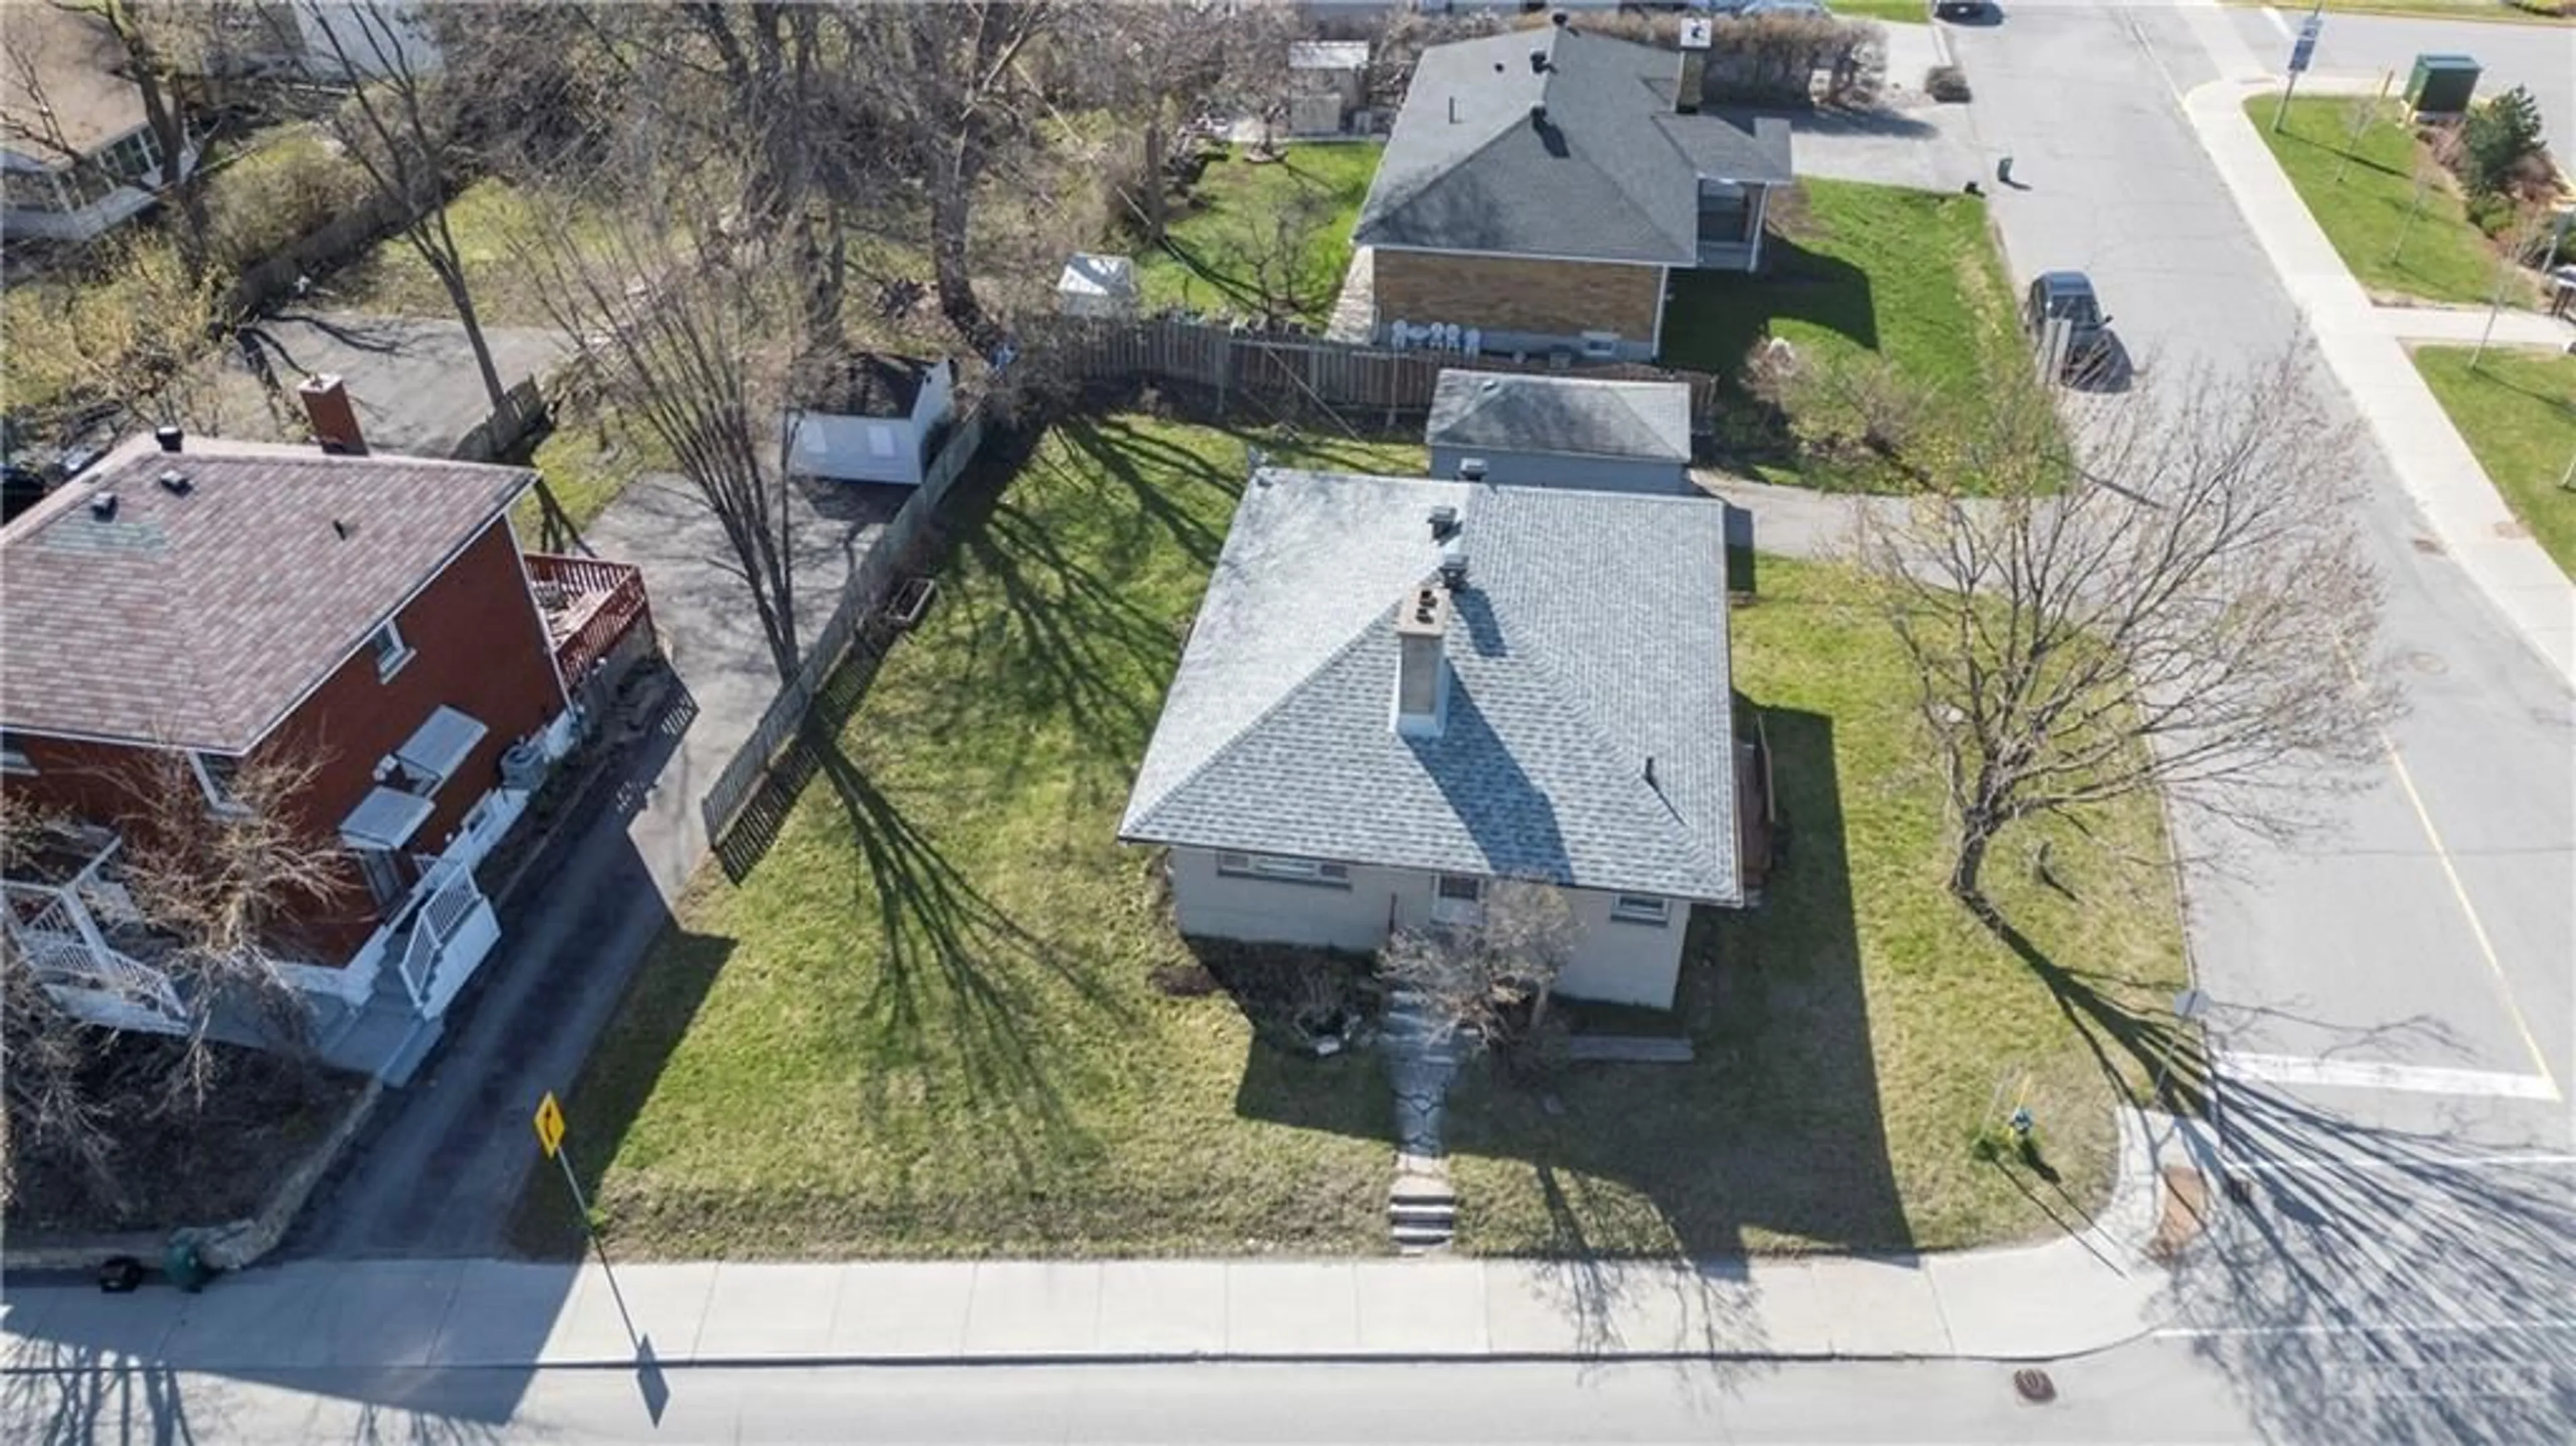 Frontside or backside of a home for 2114 CARLING Ave, Ottawa Ontario K2A 1G9